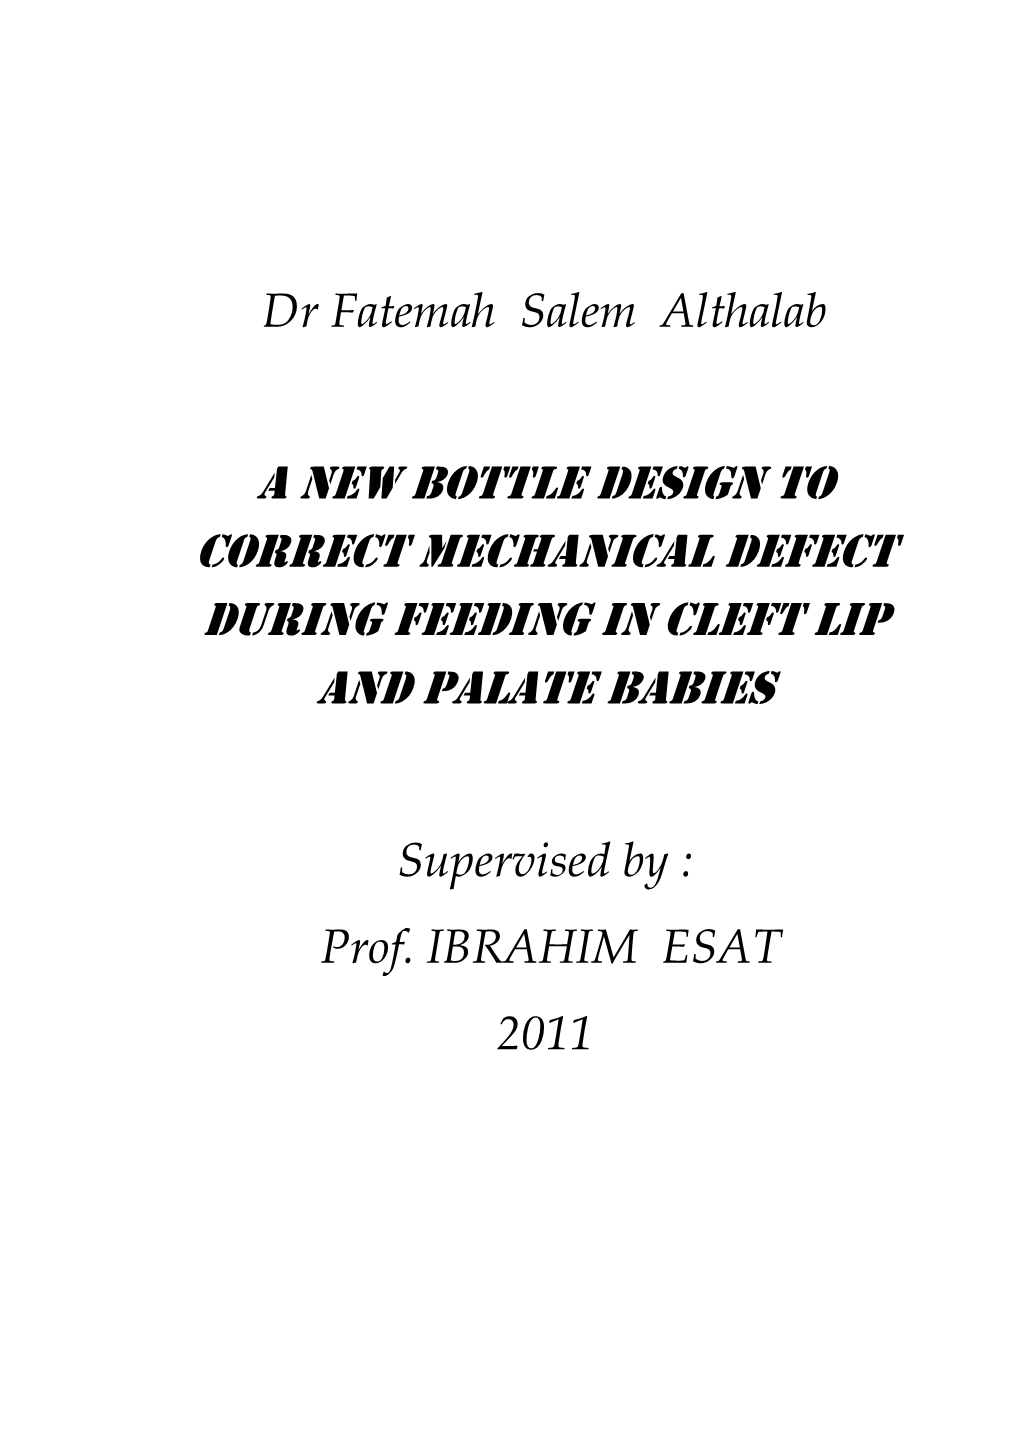 A New Bottle Design to Correct Mechanical Defect During Feeding in Cleft Lip and Palate Babies